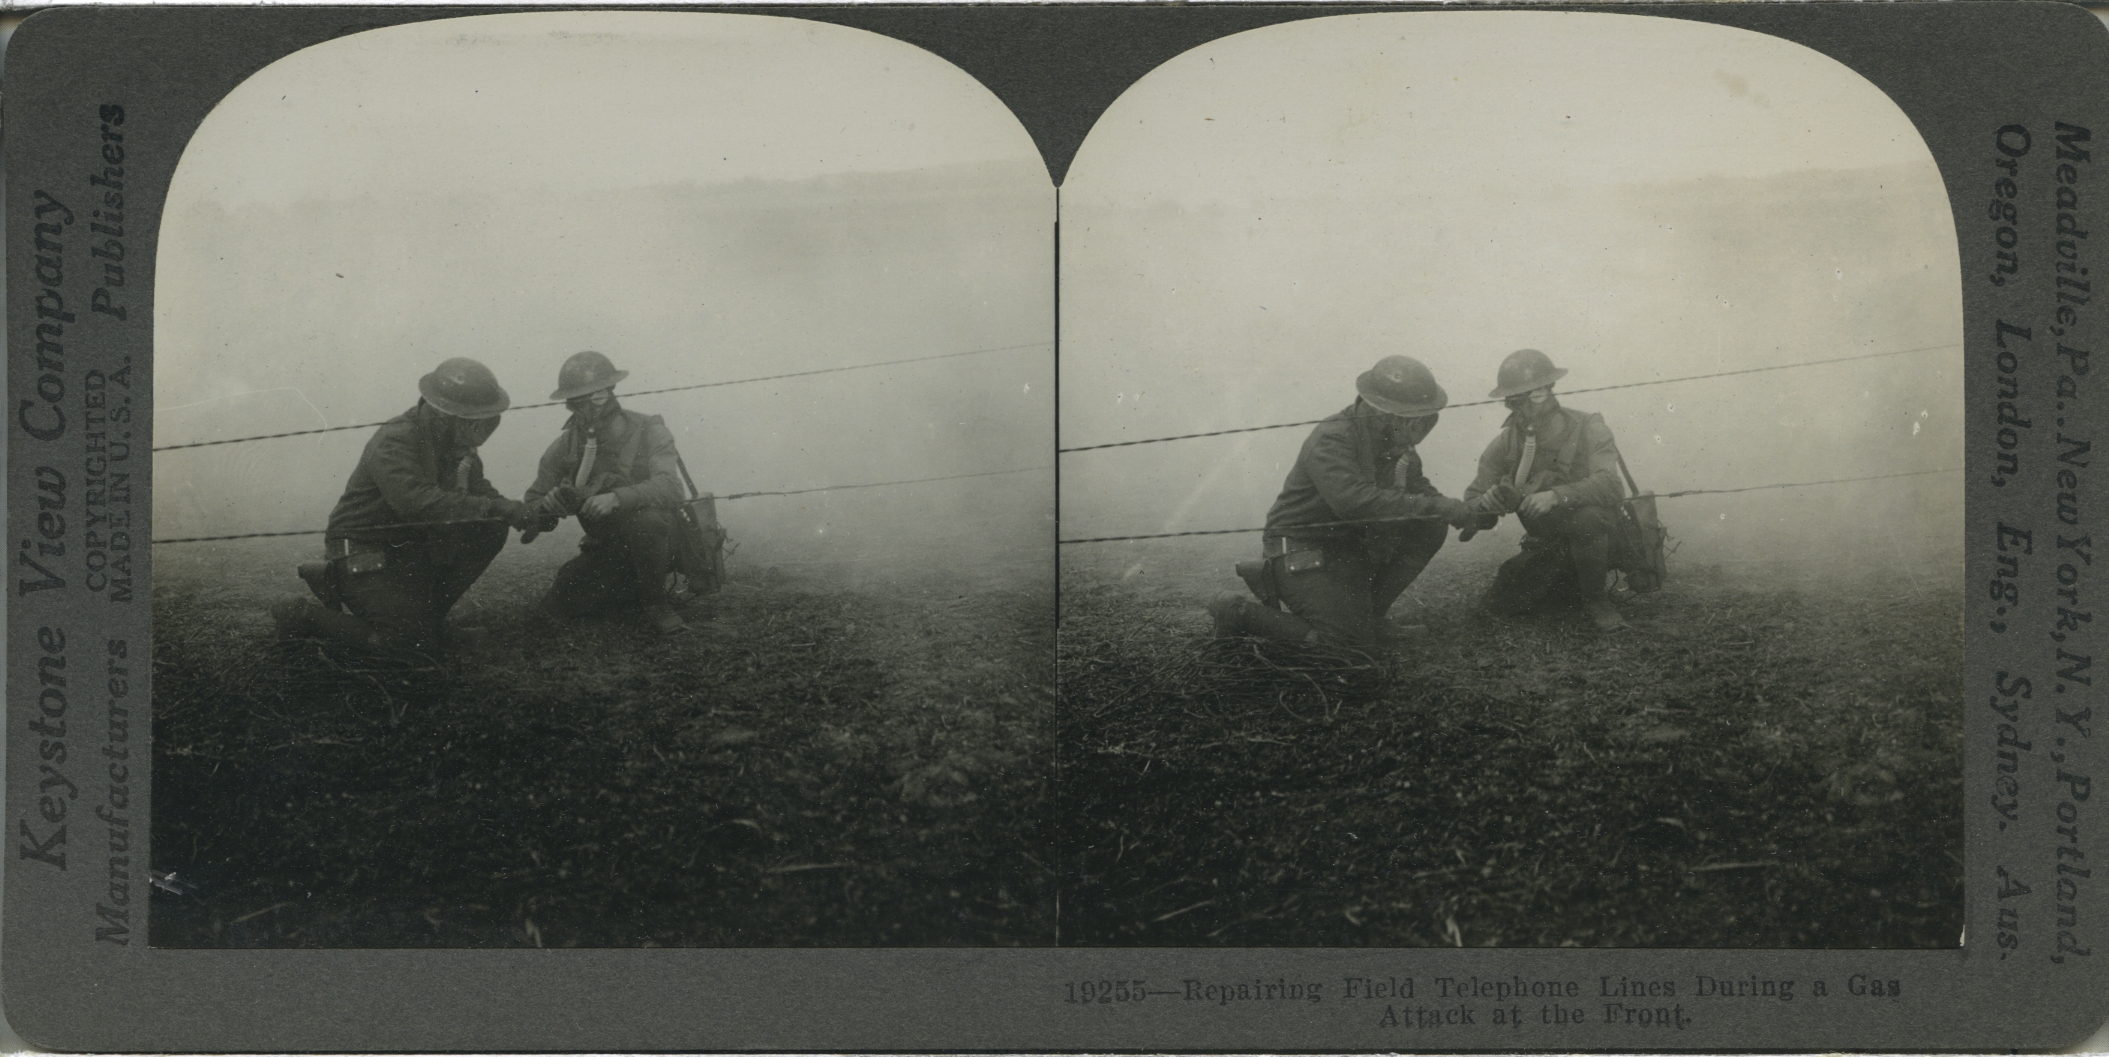 Repairing Telephone Lines During a Gas Attack at the Front